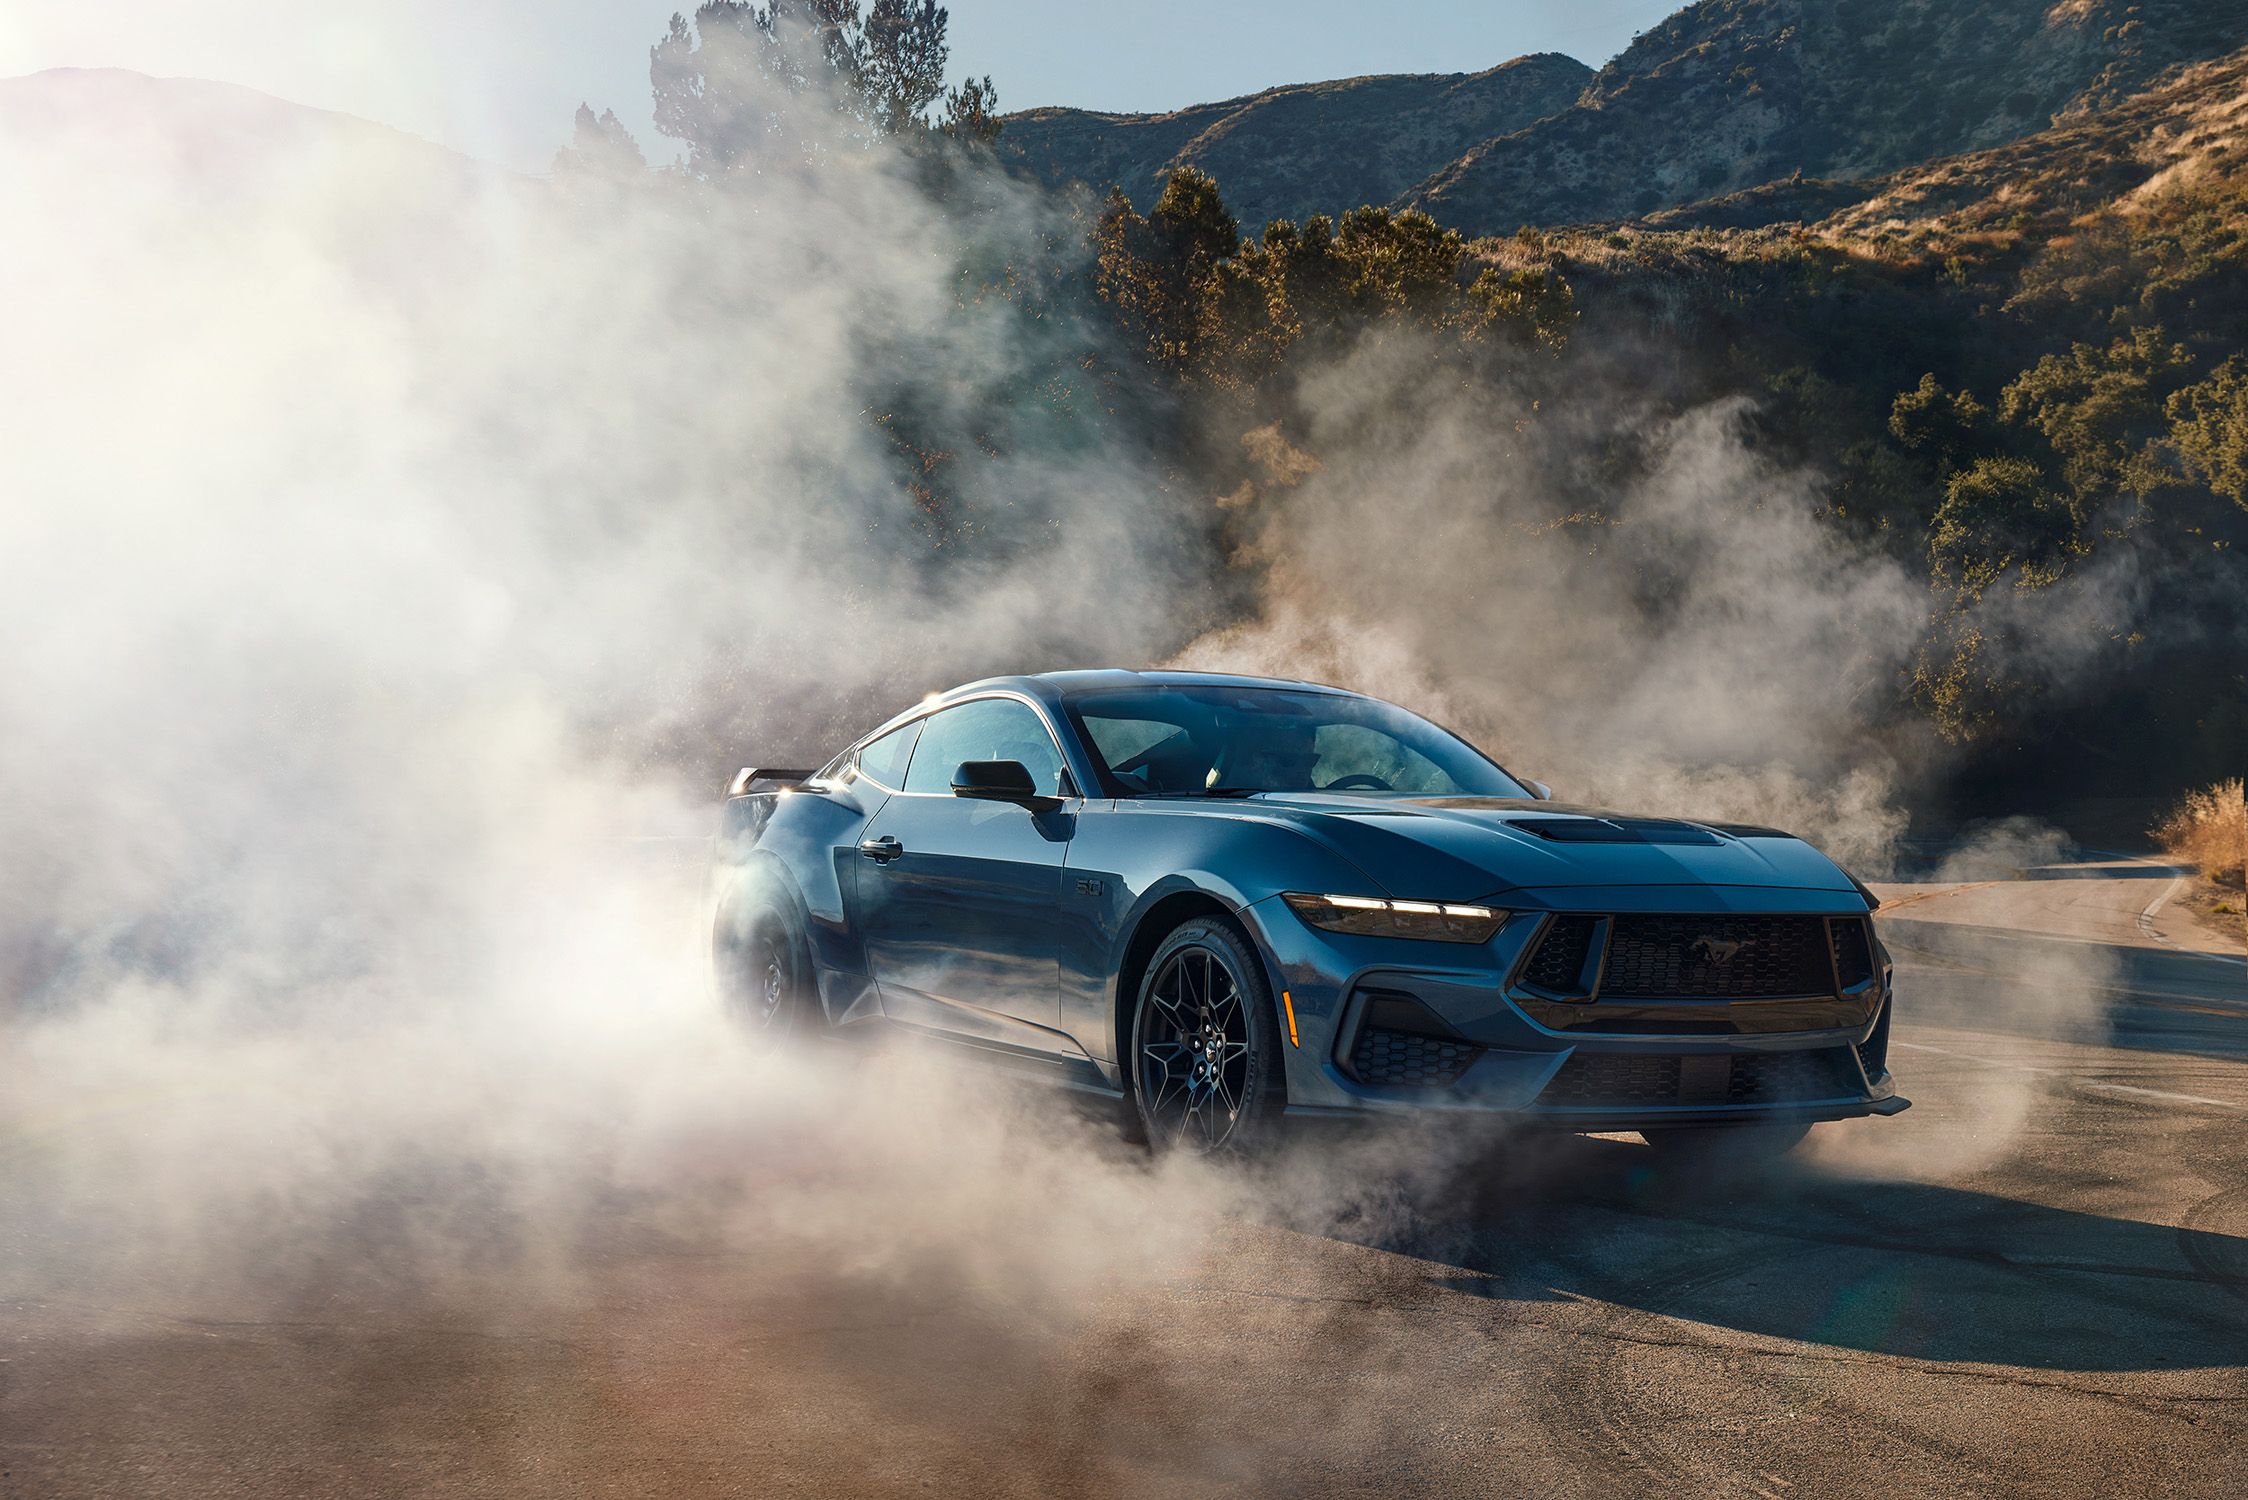 How The Need For Speed Mustang Drove So Well